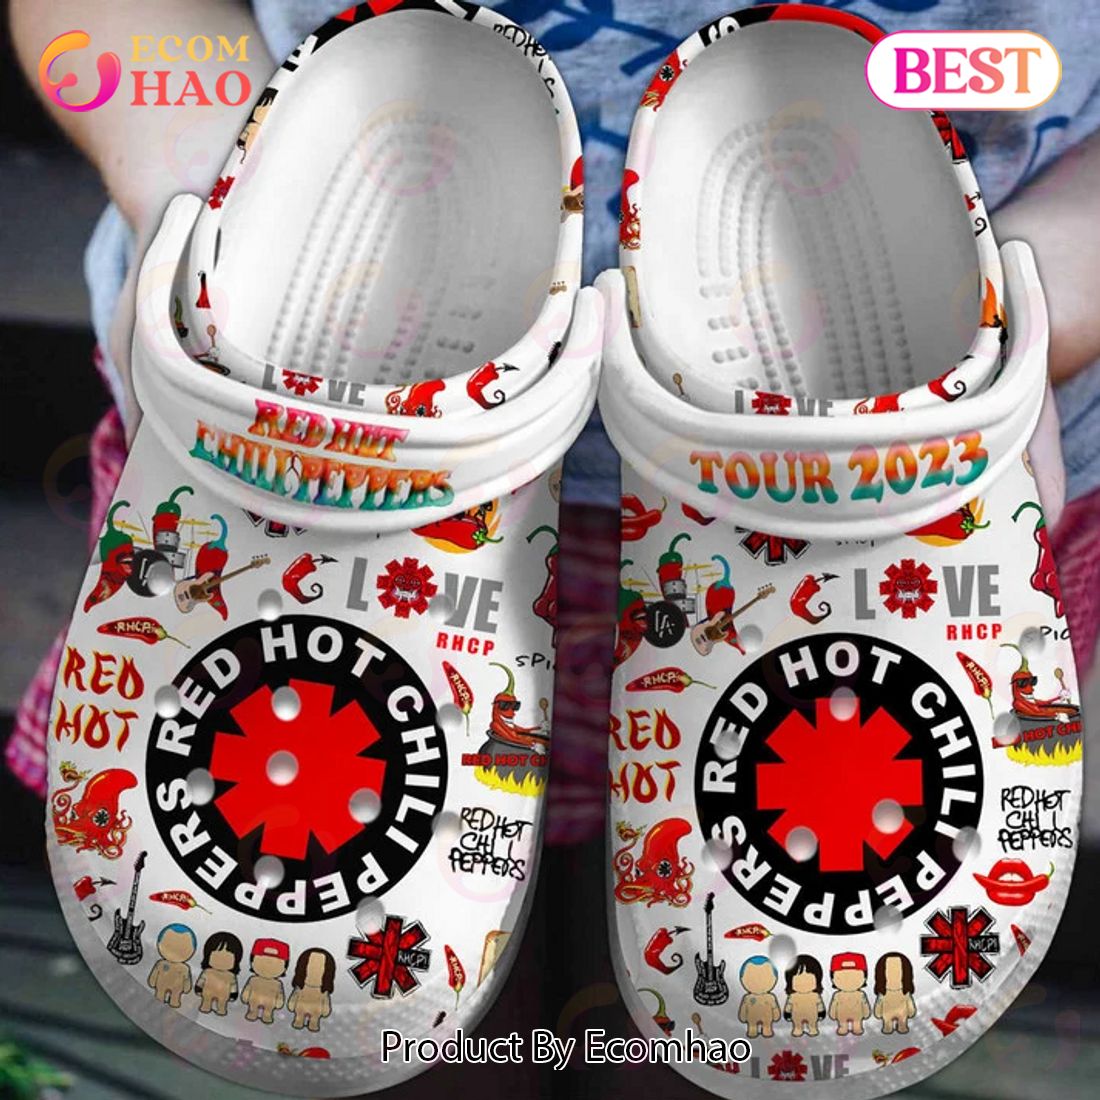 Red Hot Chili Peppers Crocs - Ecomhao Store